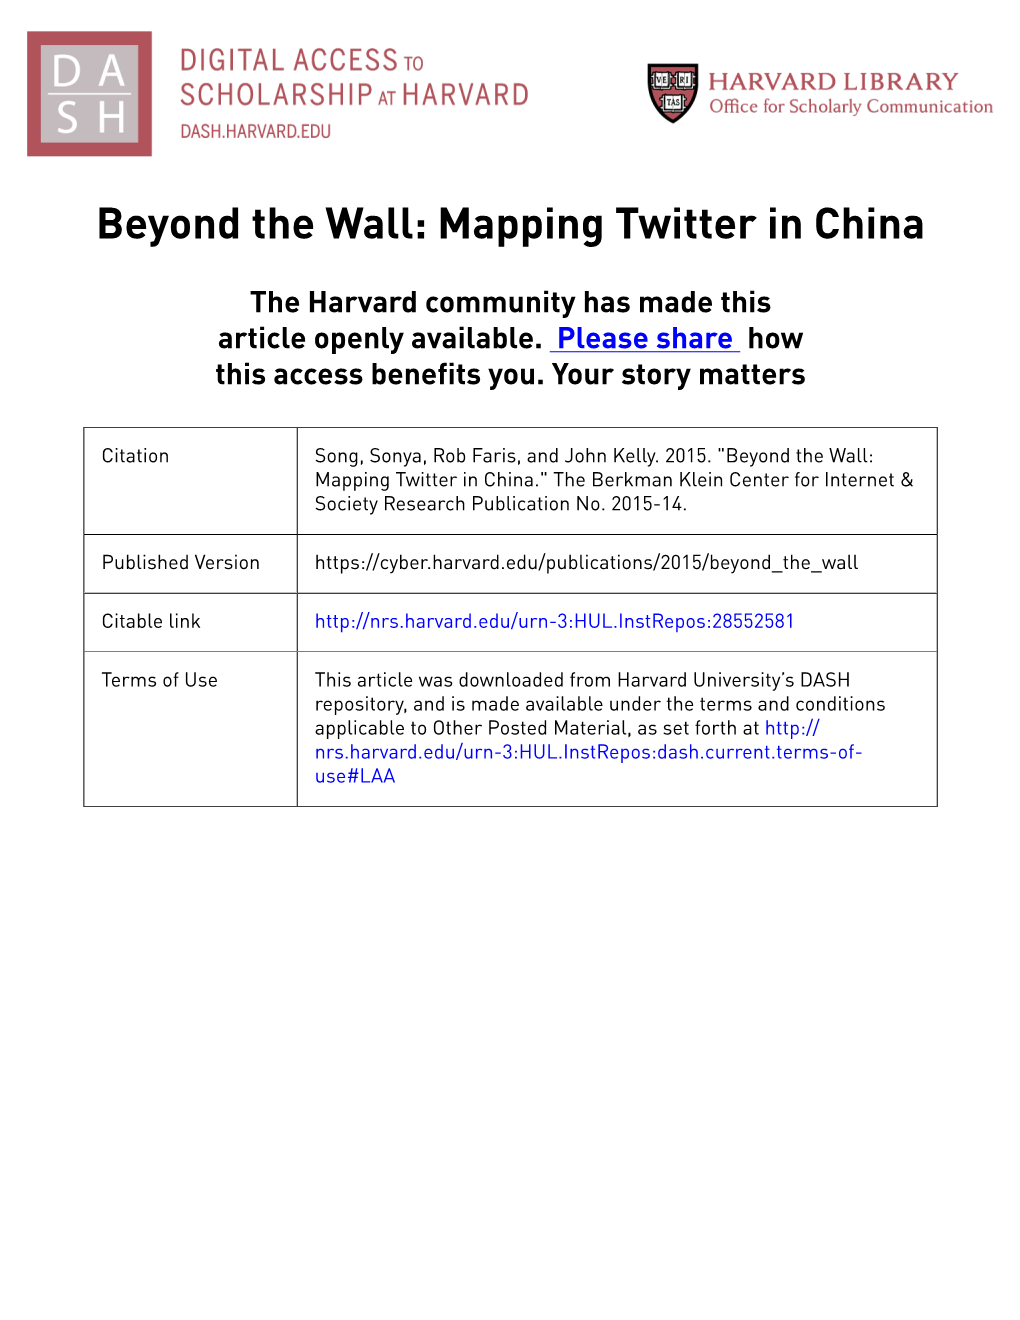 Mapping Twitter in China